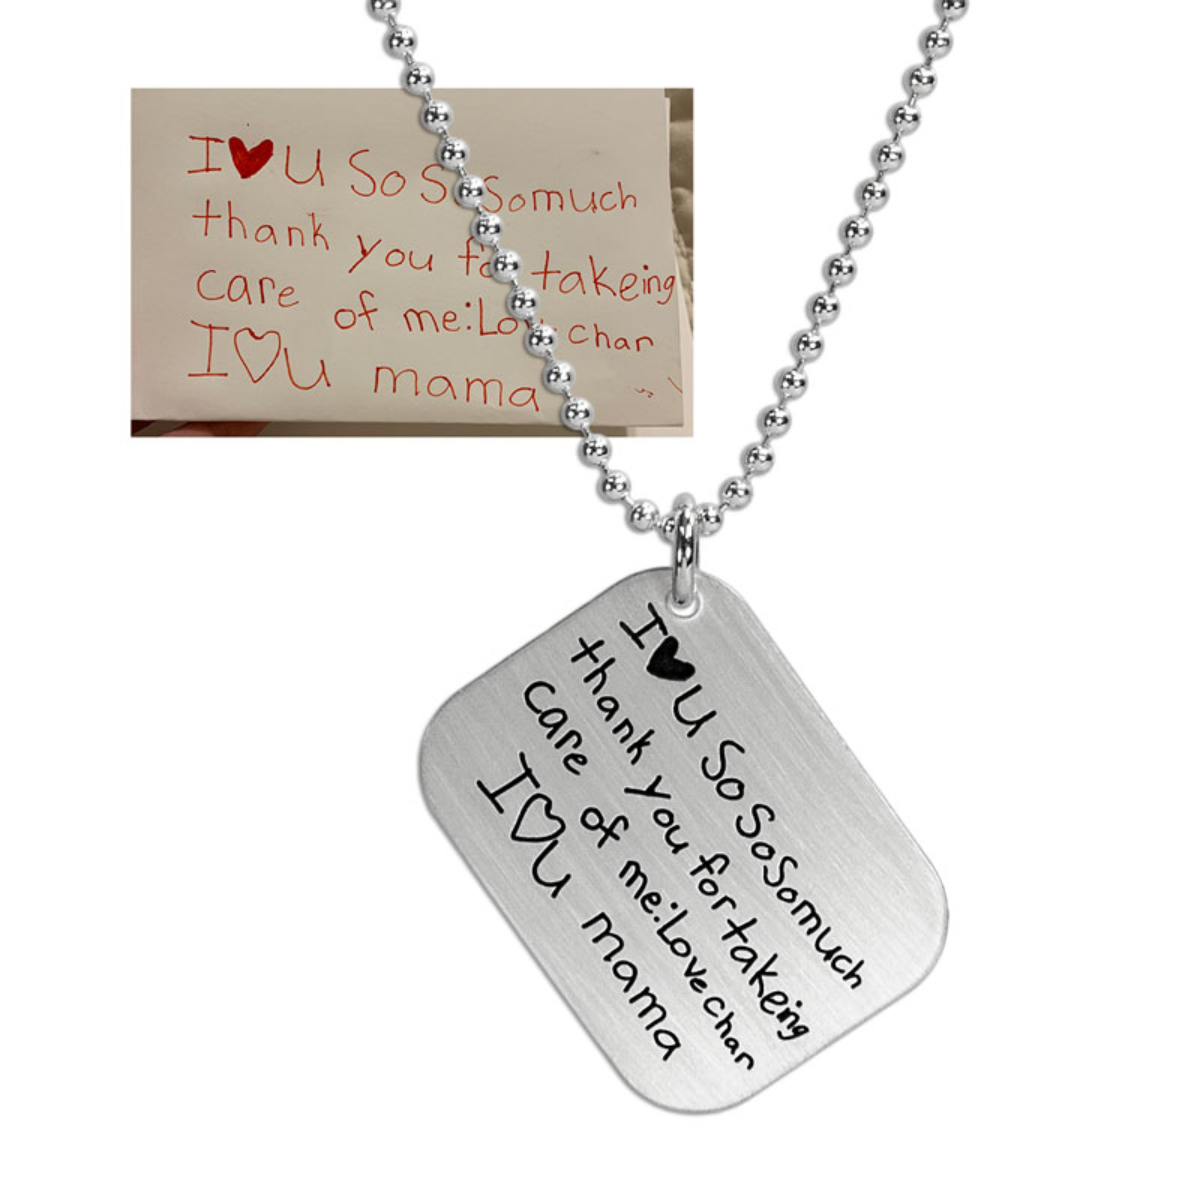 27. Captivate Their Heart with a Handwritten Love Letter Necklace - The Perfect Anniversary Gift Idea